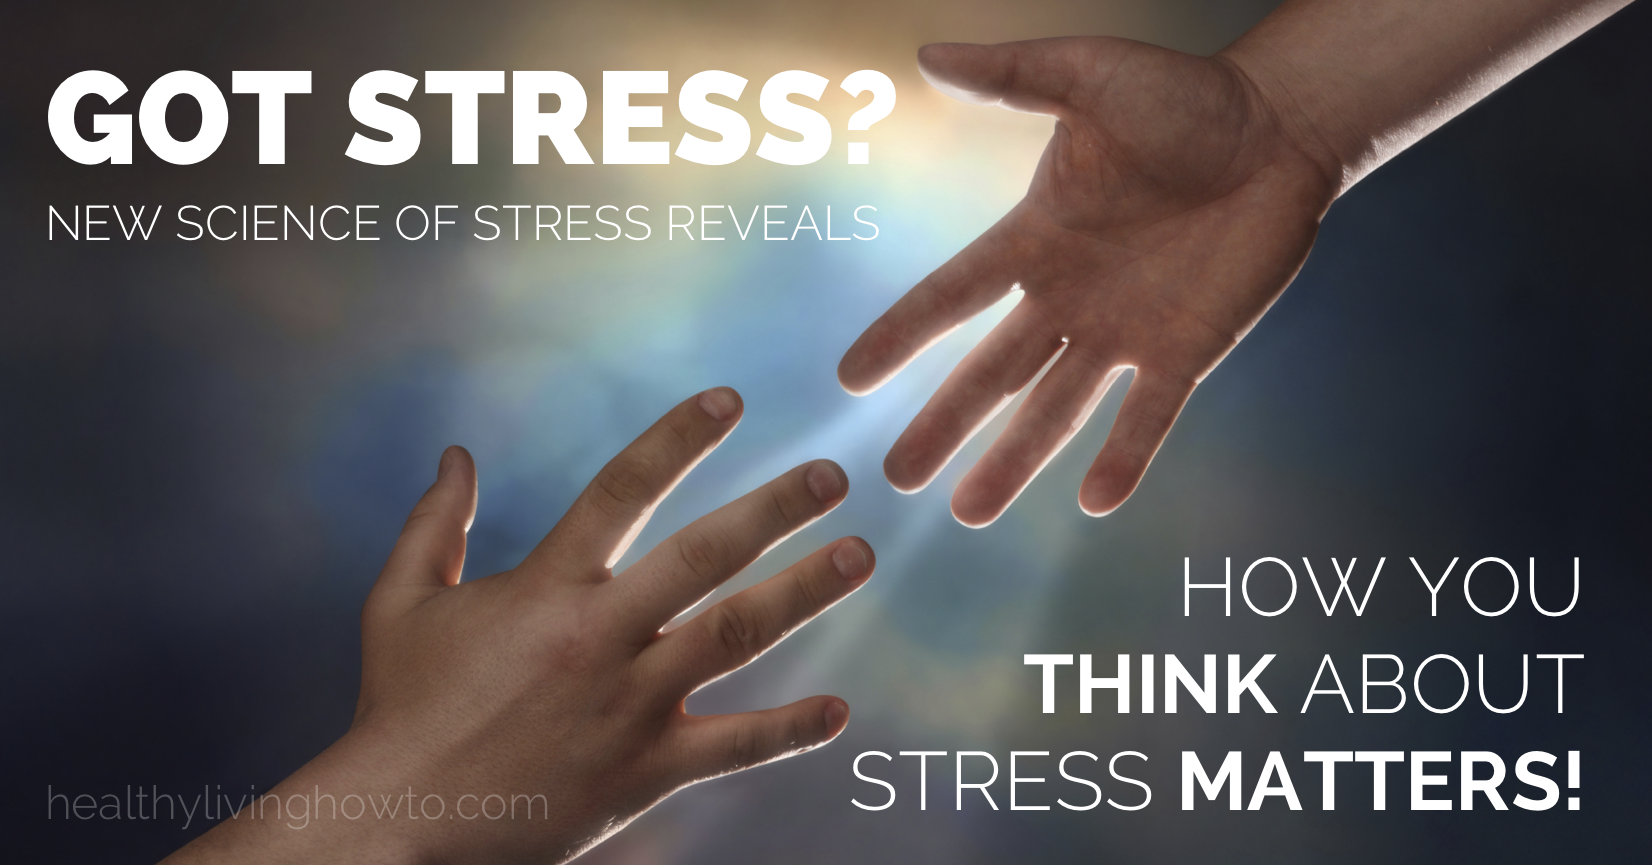 Got Stress? How You Think About Stress Matters! | healthylivinghowto.com